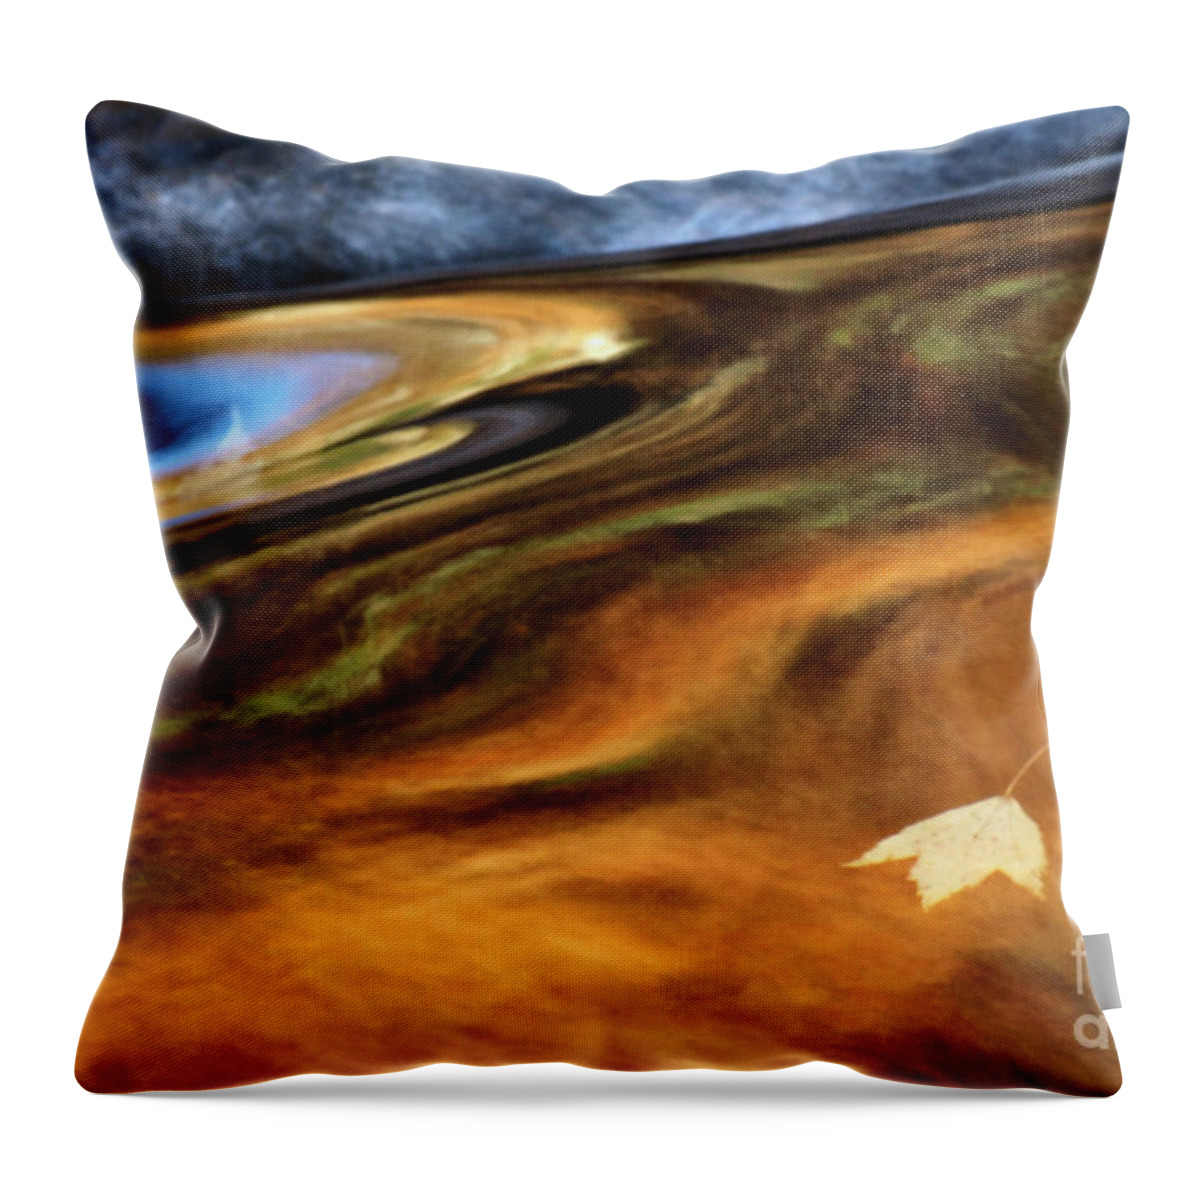 Abstract Throw Pillow featuring the photograph Autumn - D004549 by Daniel Dempster